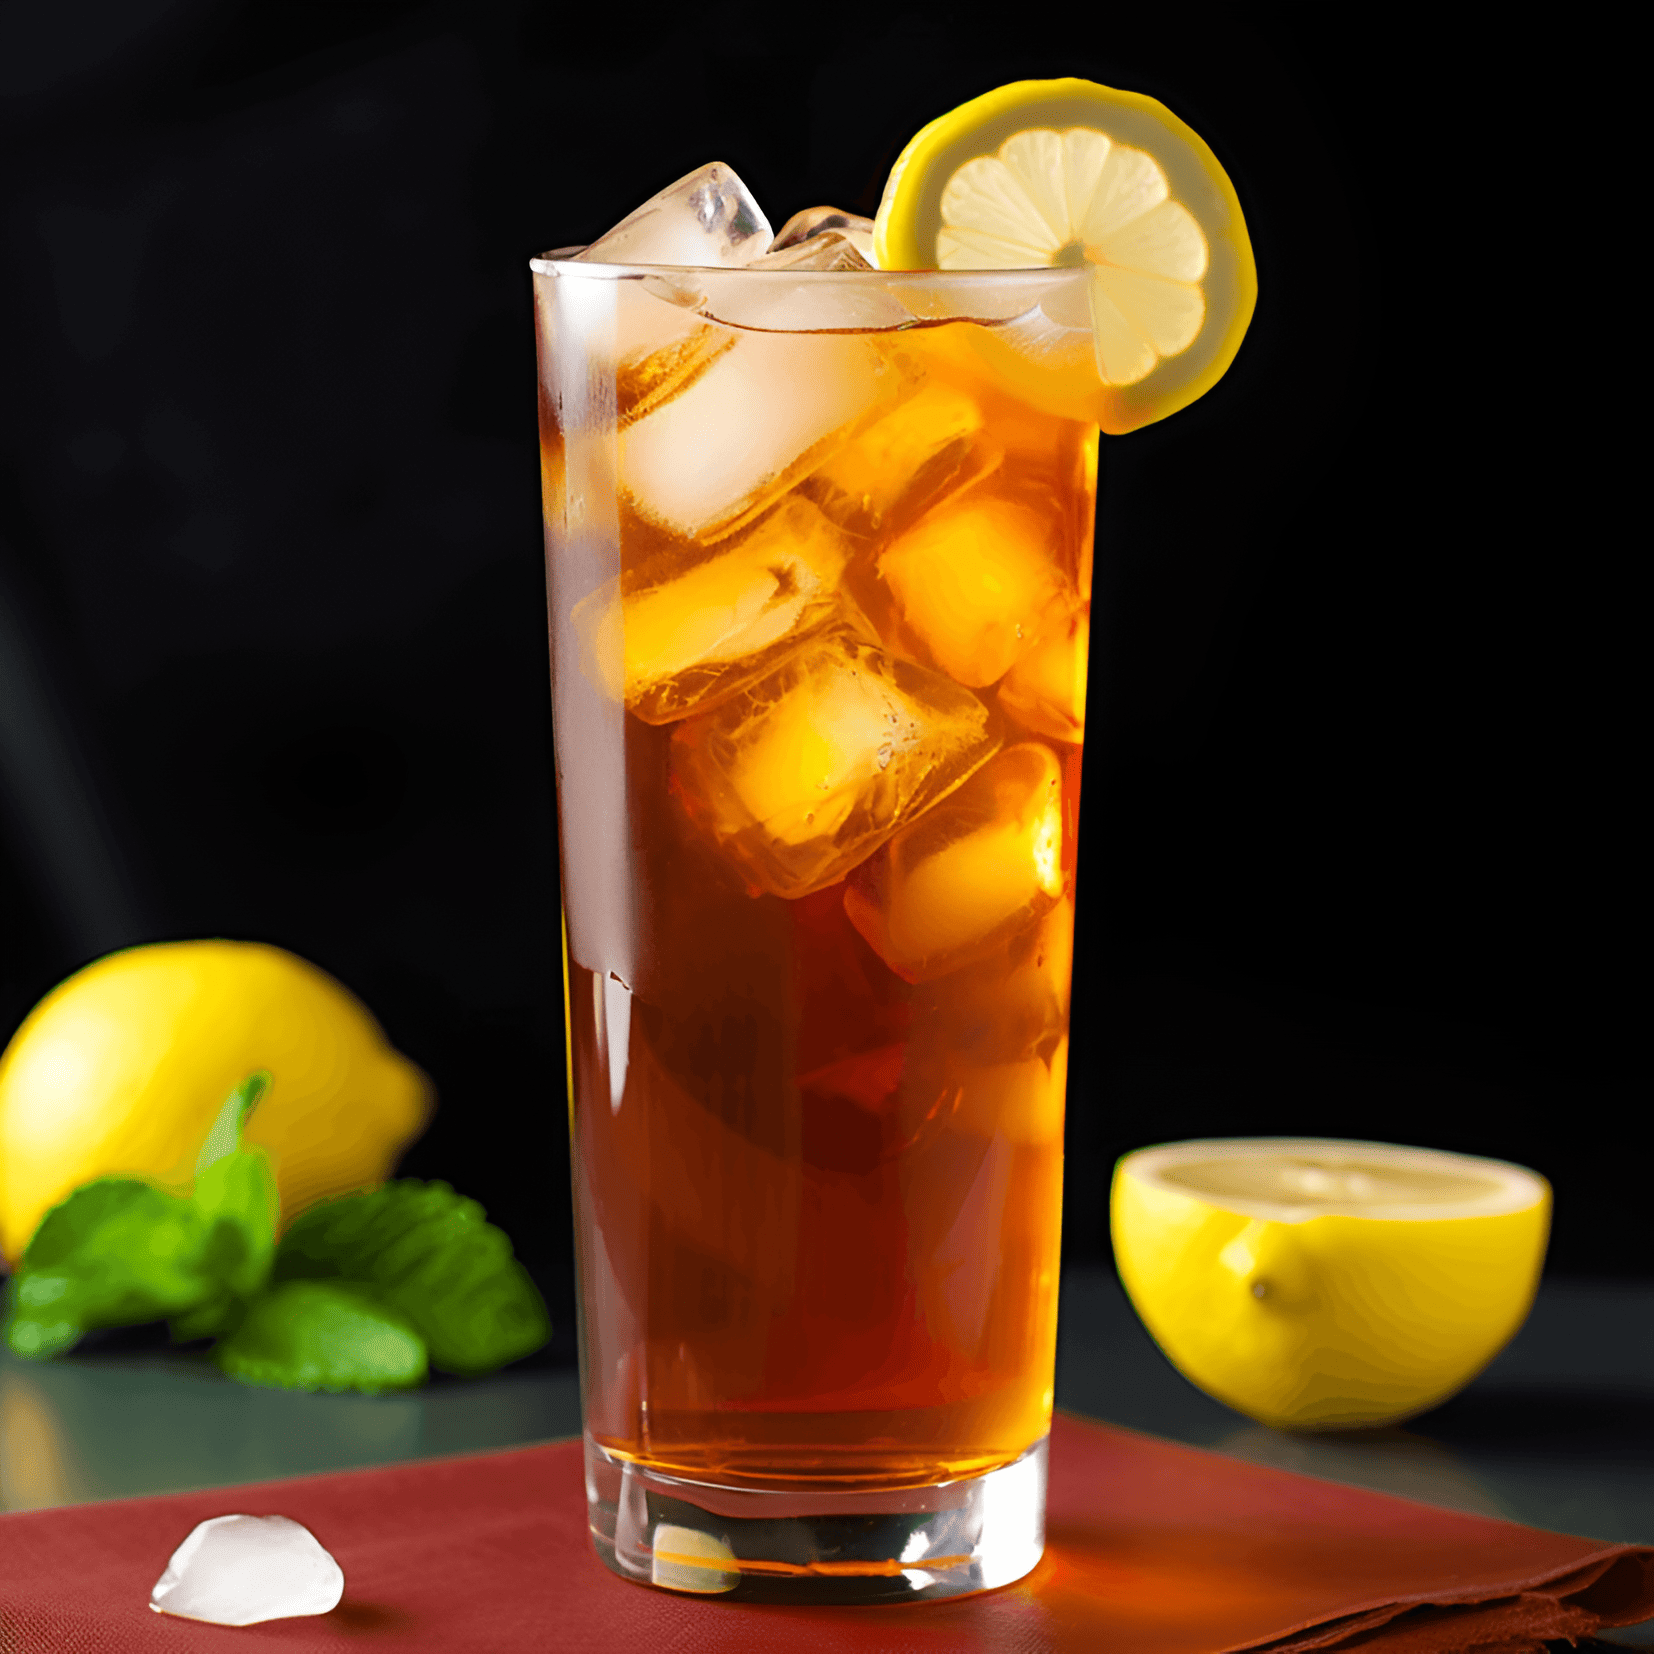 Sweet Tea Cocktail Recipe - Sweet Tea cocktail is a perfect blend of sweet, tangy, and refreshing flavors. The sweetness from the sugar and the natural flavors of the tea are balanced by the tartness of the lemon and the subtle kick from the alcohol. It's a light and easy-drinking cocktail that can be enjoyed by anyone who loves a sweet and refreshing beverage.